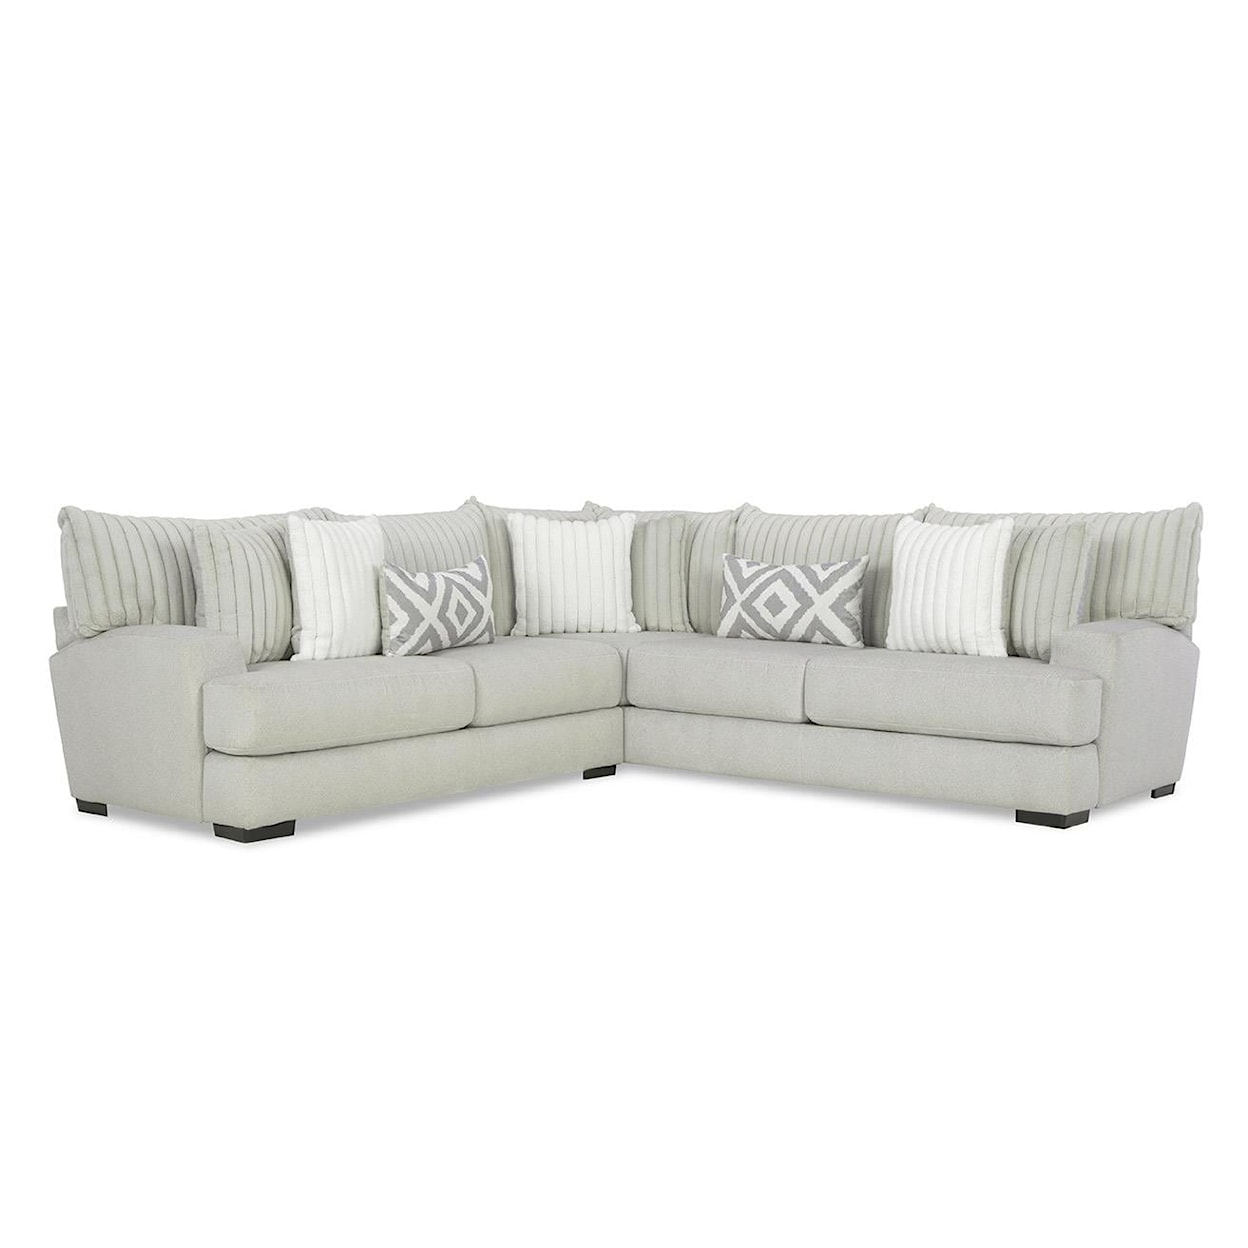 Albany 938 Tweed Silver 2-Piece Sectional Sofa